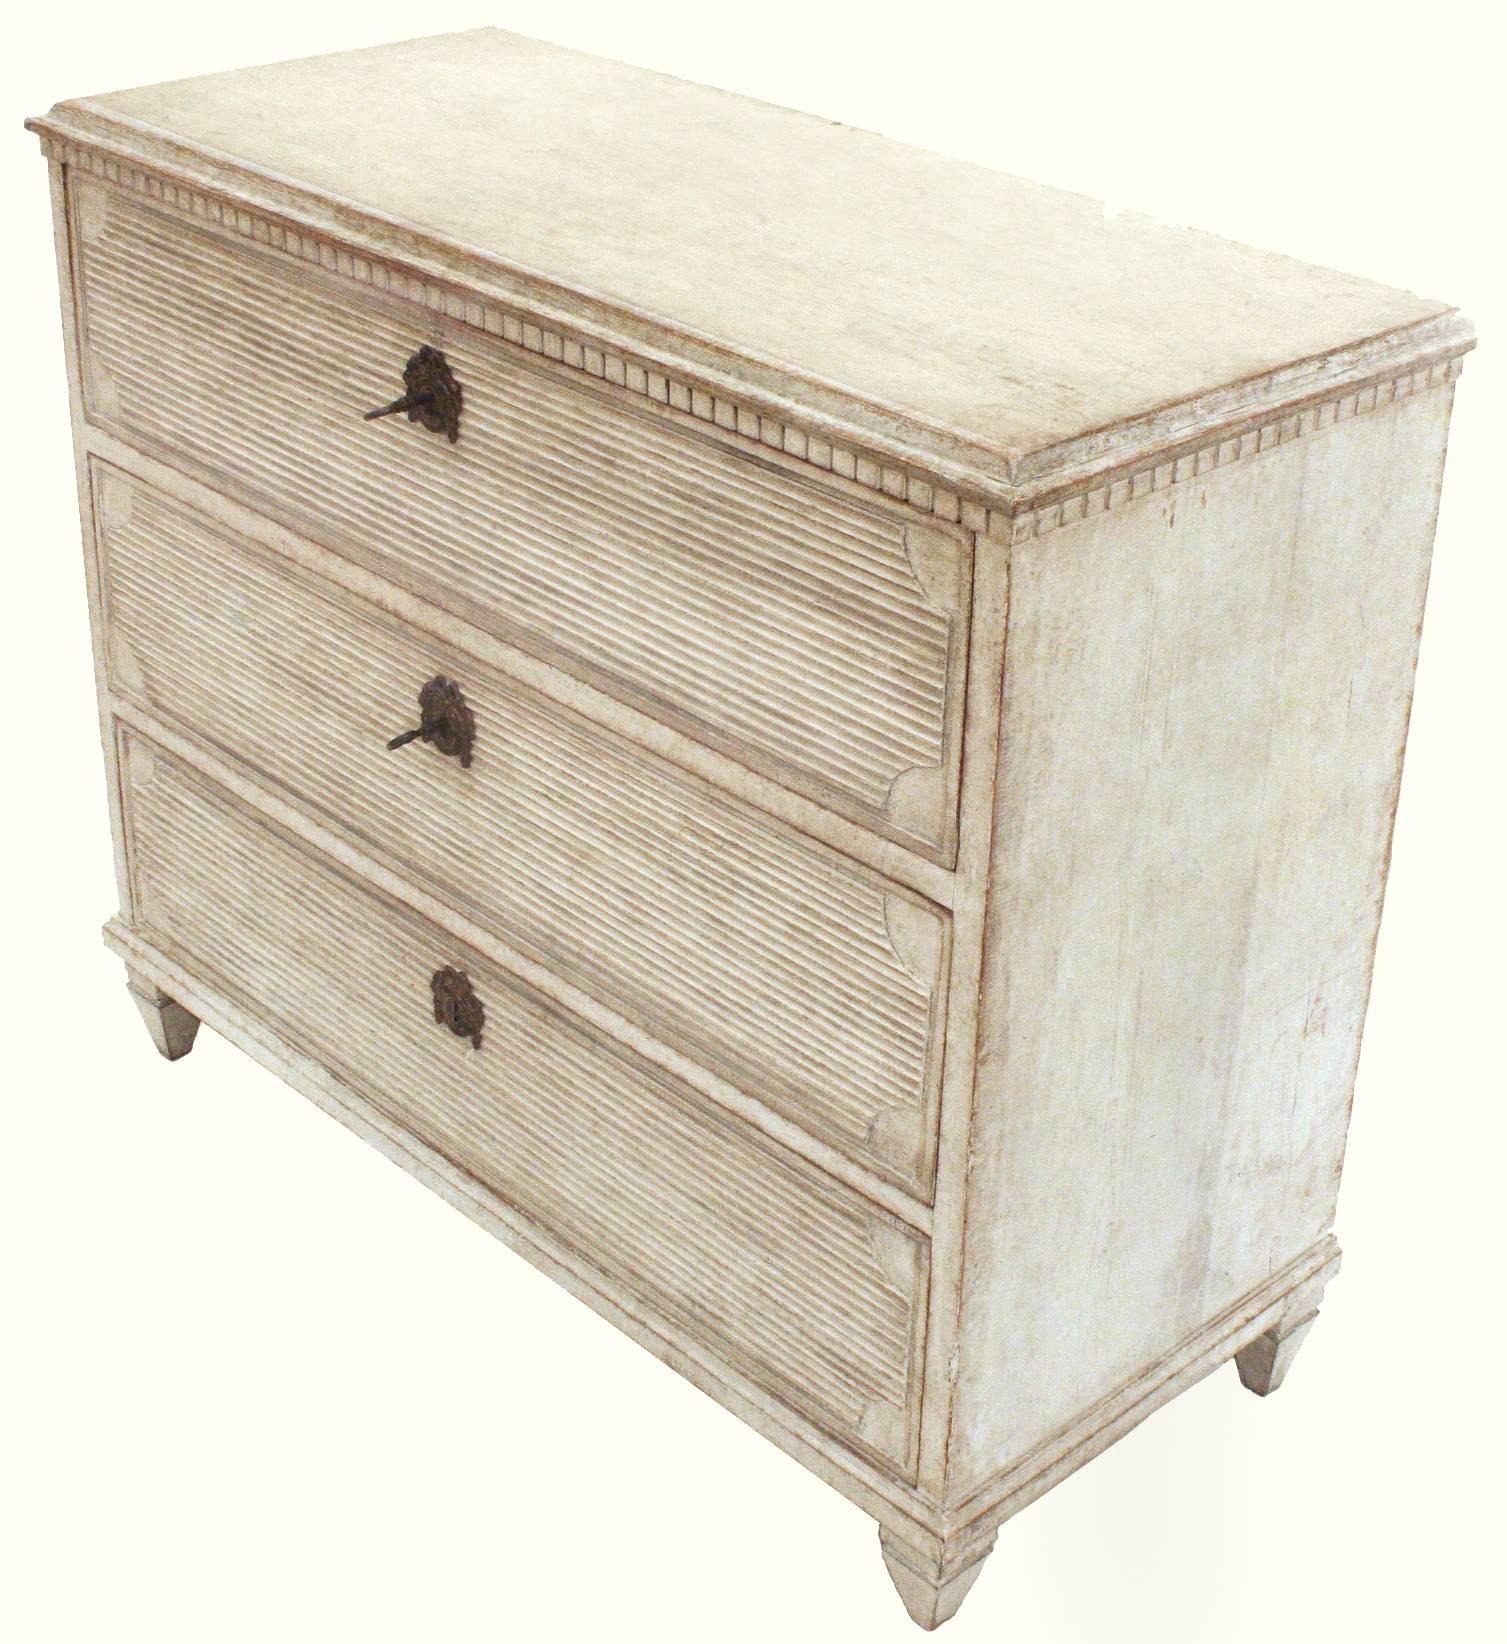 An attractive and decorative Gustavian style chest, with three horizontal reeded drawers and brass hardware, dentil molding and square tapered feet. The piece has a lovely white patina. Two keys. Swedish, circa 1860.